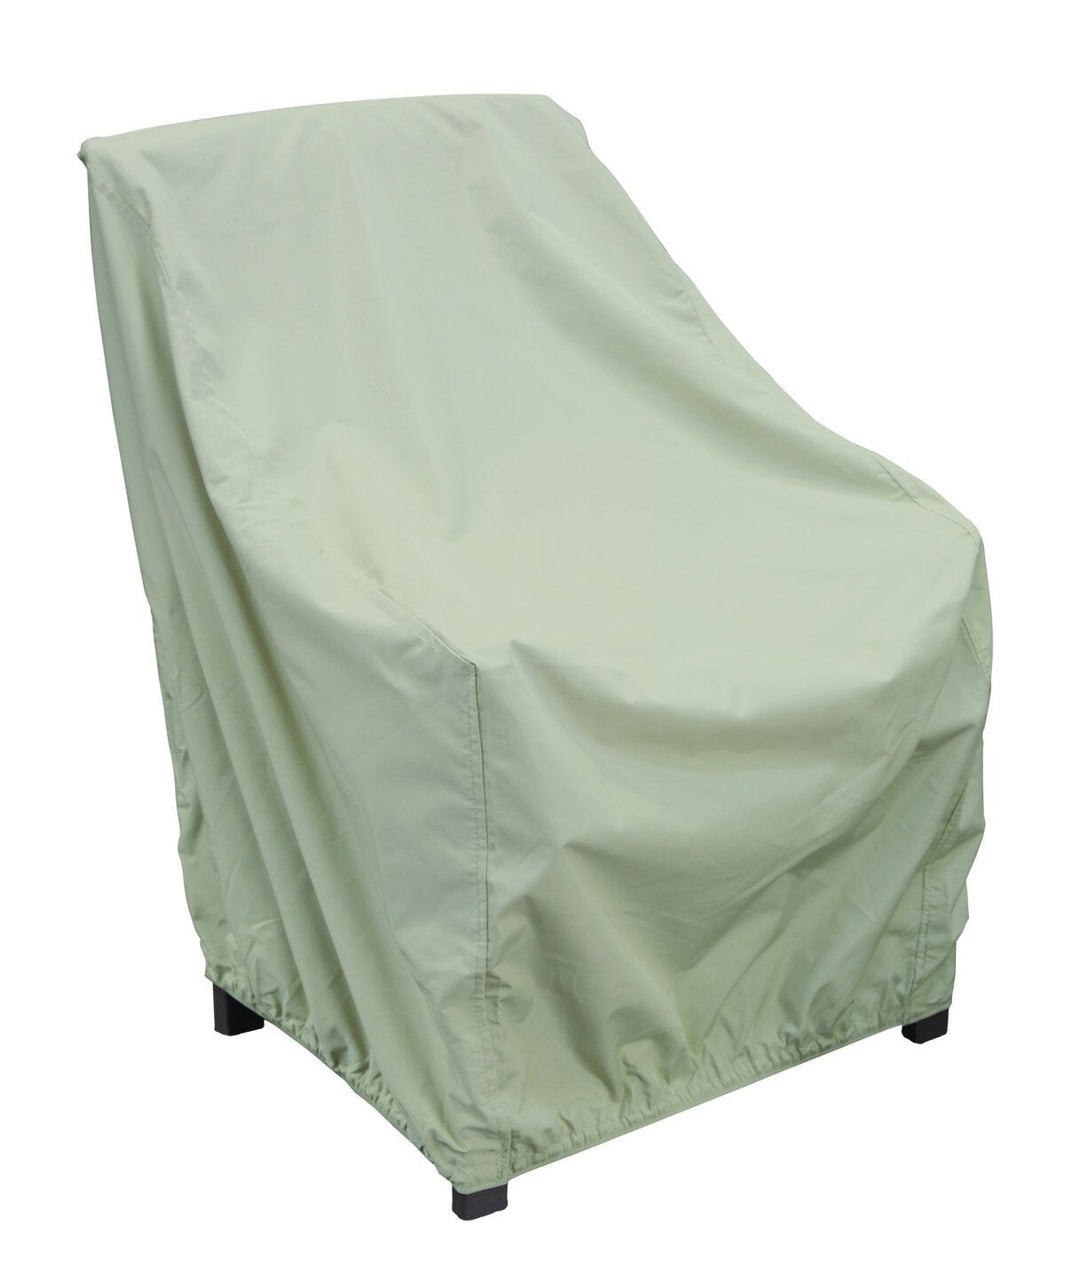 Lounge Chair Protective Covers